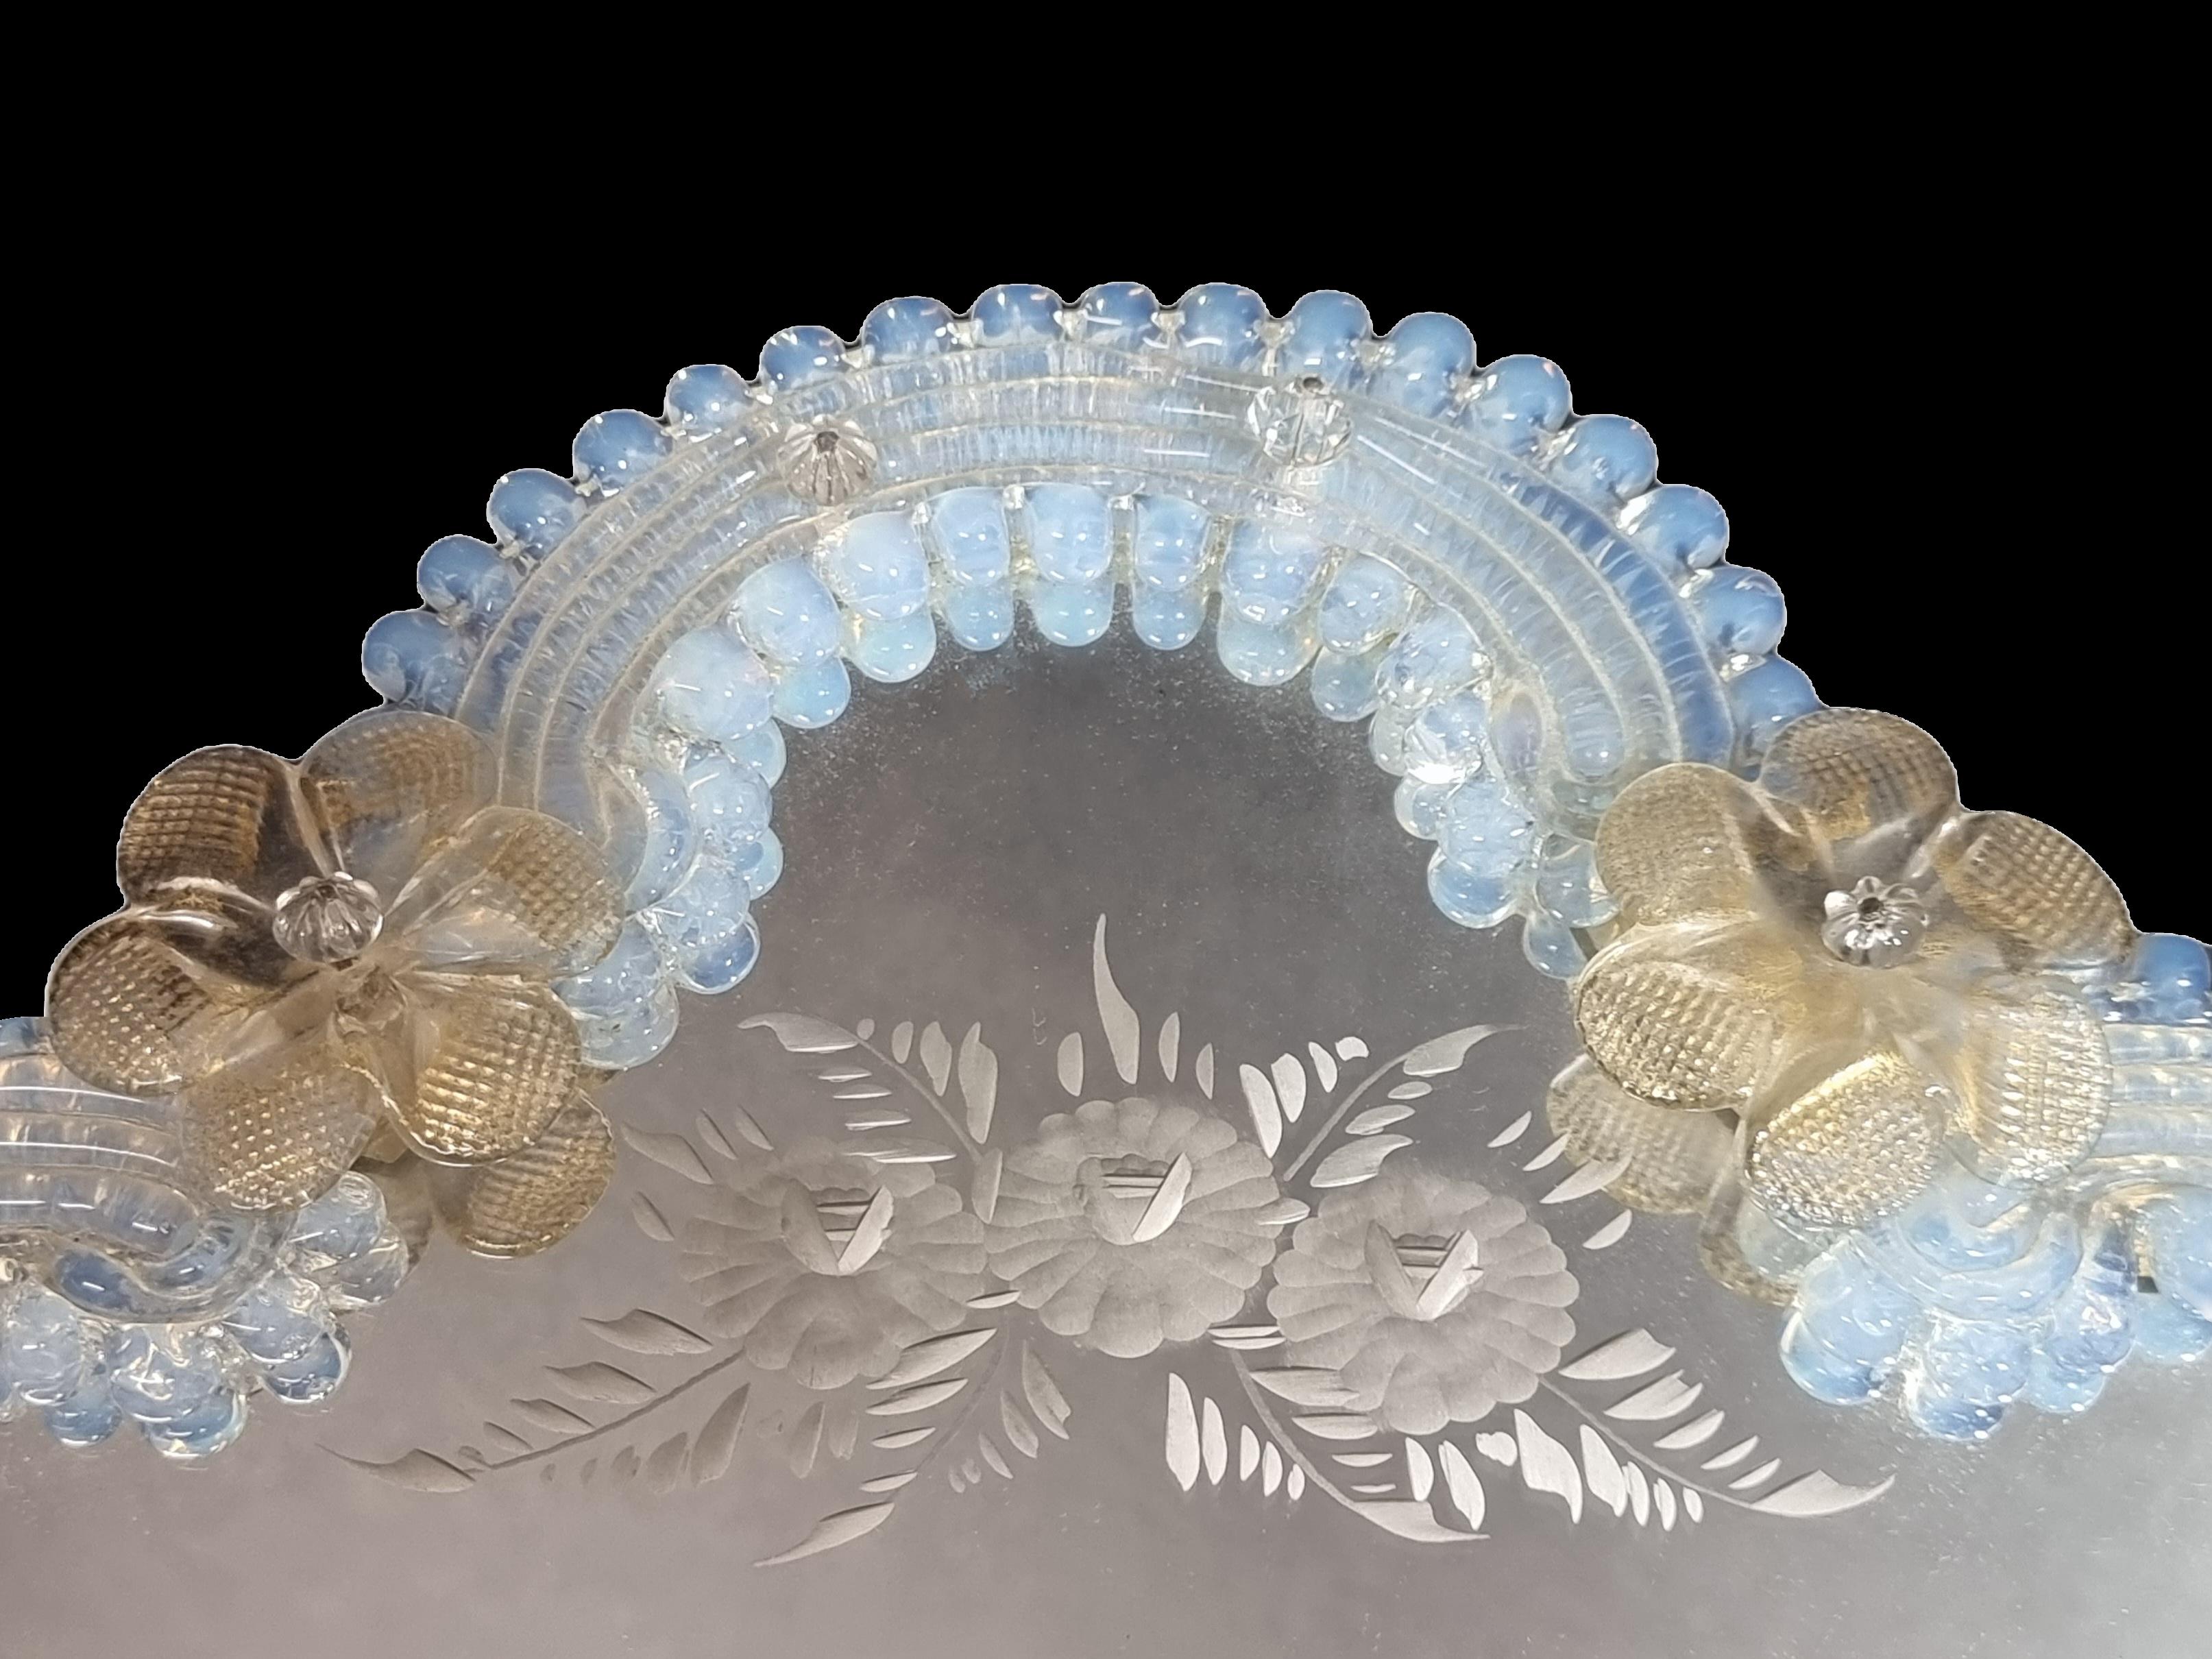 Hand-Crafted Floral Venetian Glass Murano Table Mirror  Italian  Mid 20th Century For Sale